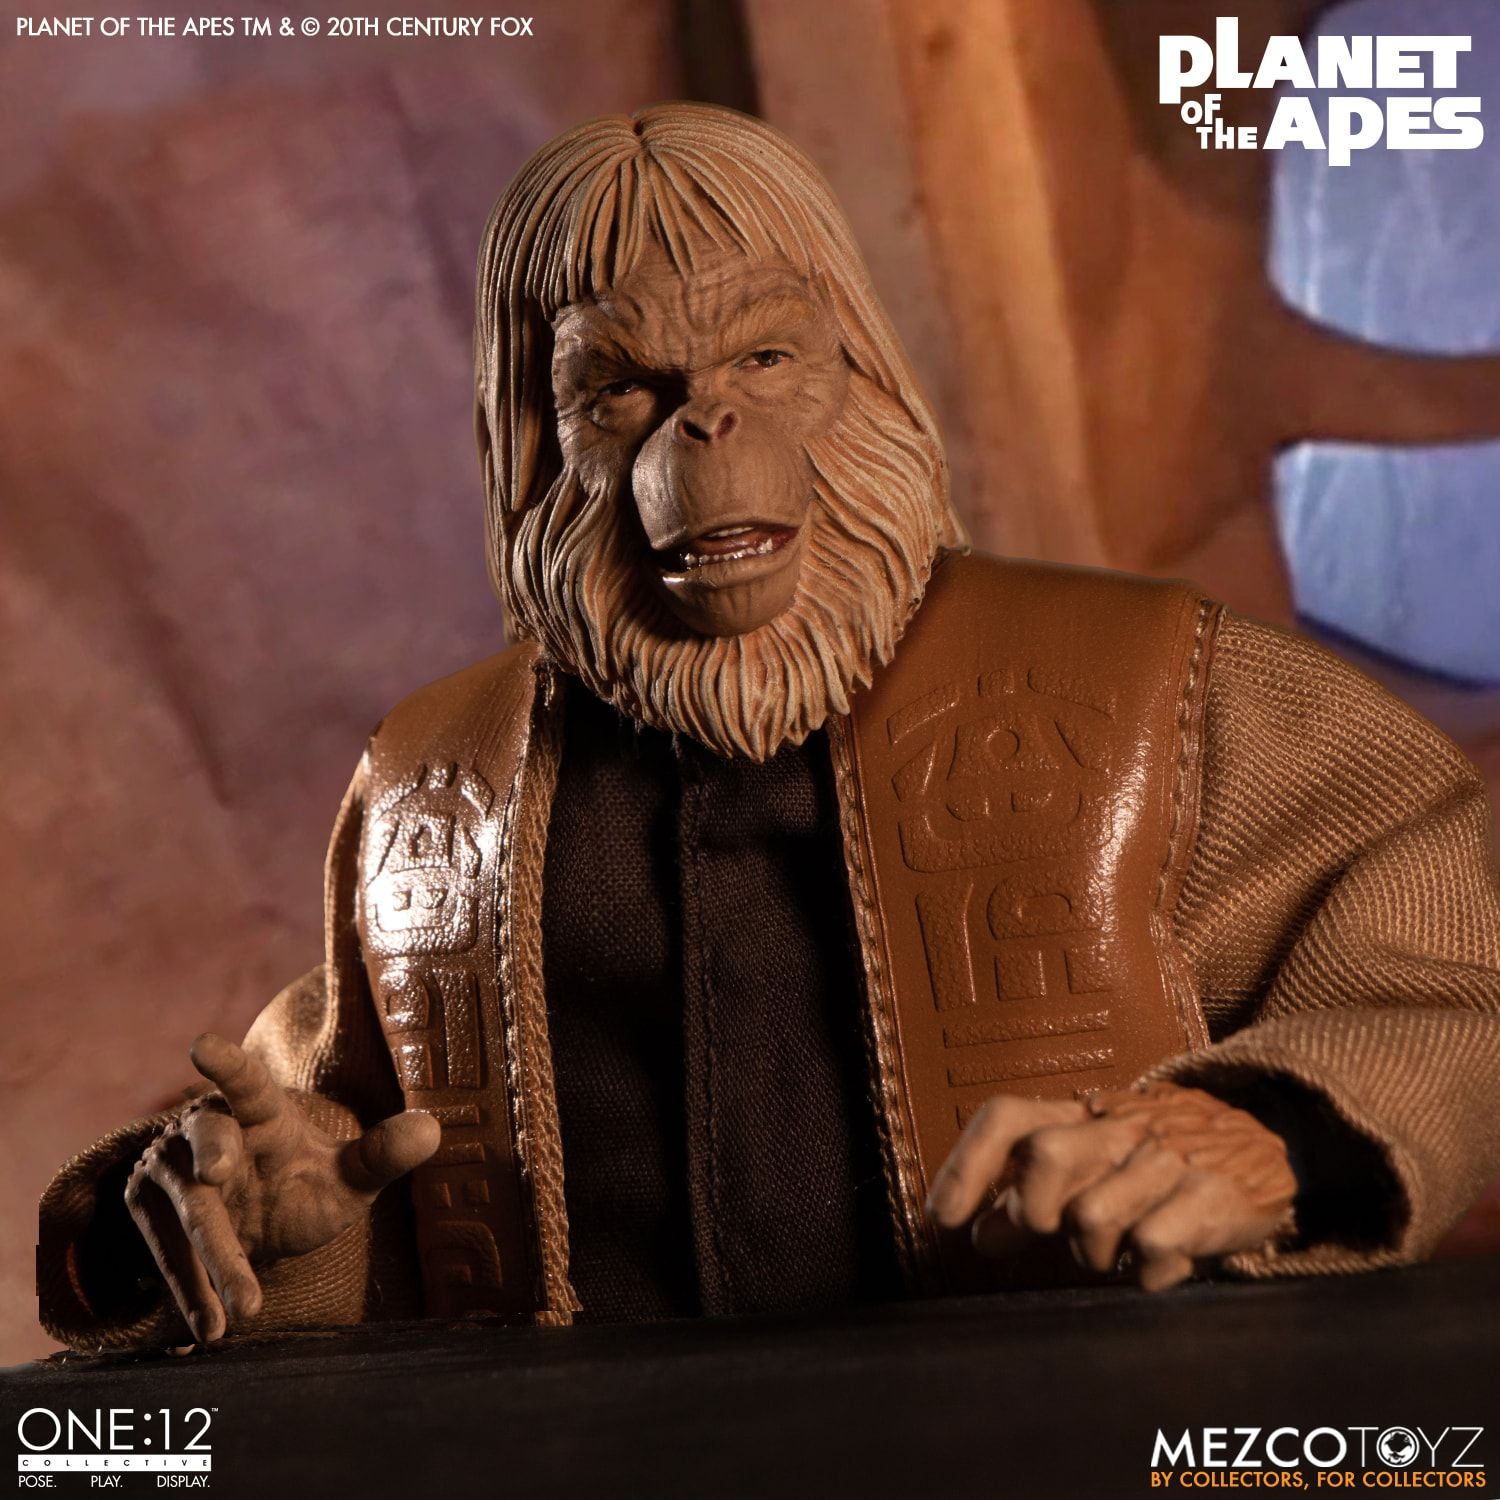 New Product: Mezco Planet of the Apes Dr. Zaius 8348